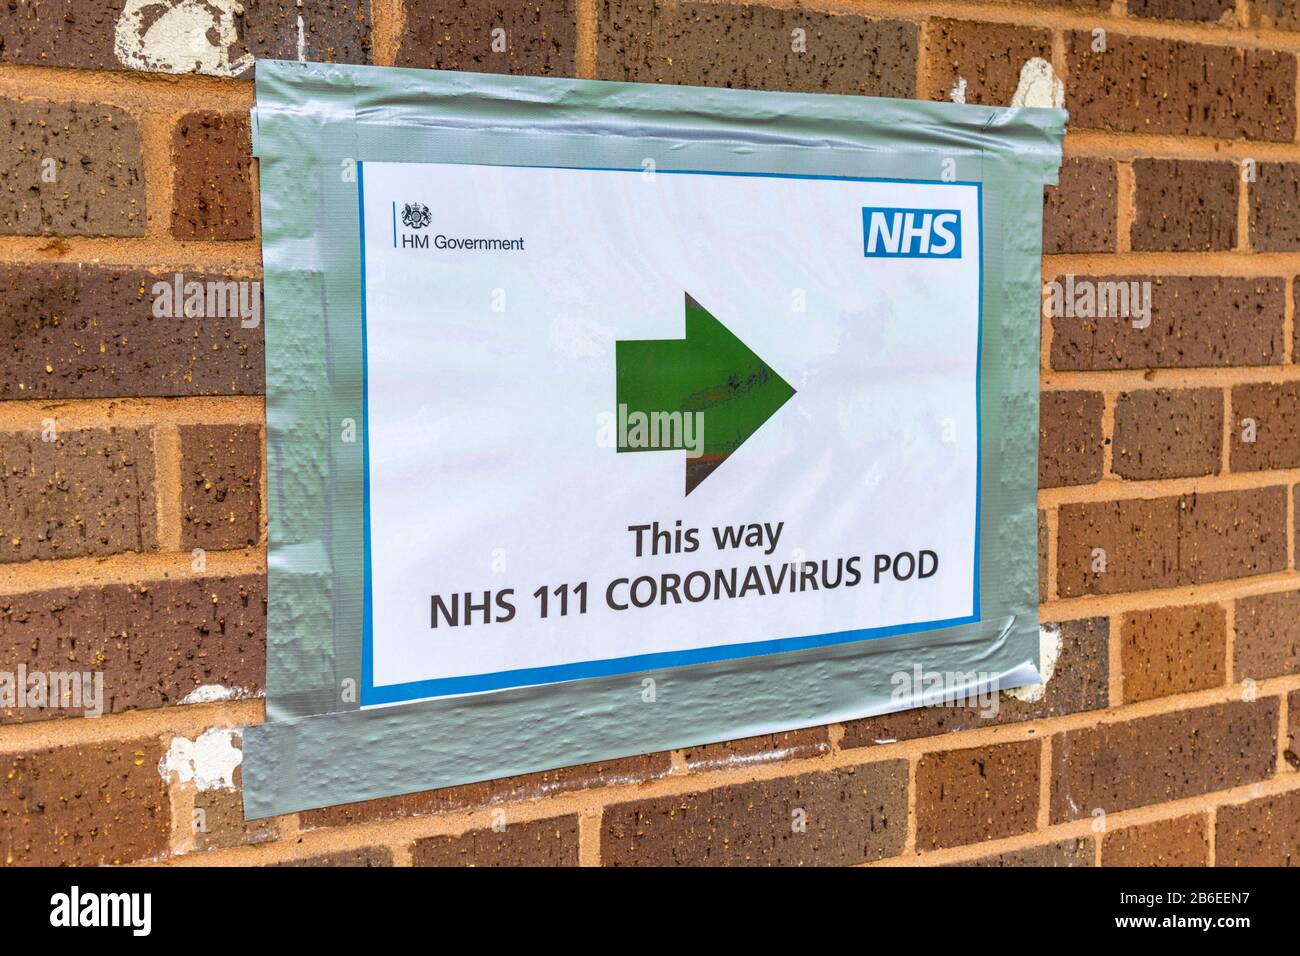 Sign pointing to a NHS 111 Coronavirus Pod, Southampton General Hospital, a teaching hospital of University Hospital Southampton NHS Foundation Trust Stock Photo